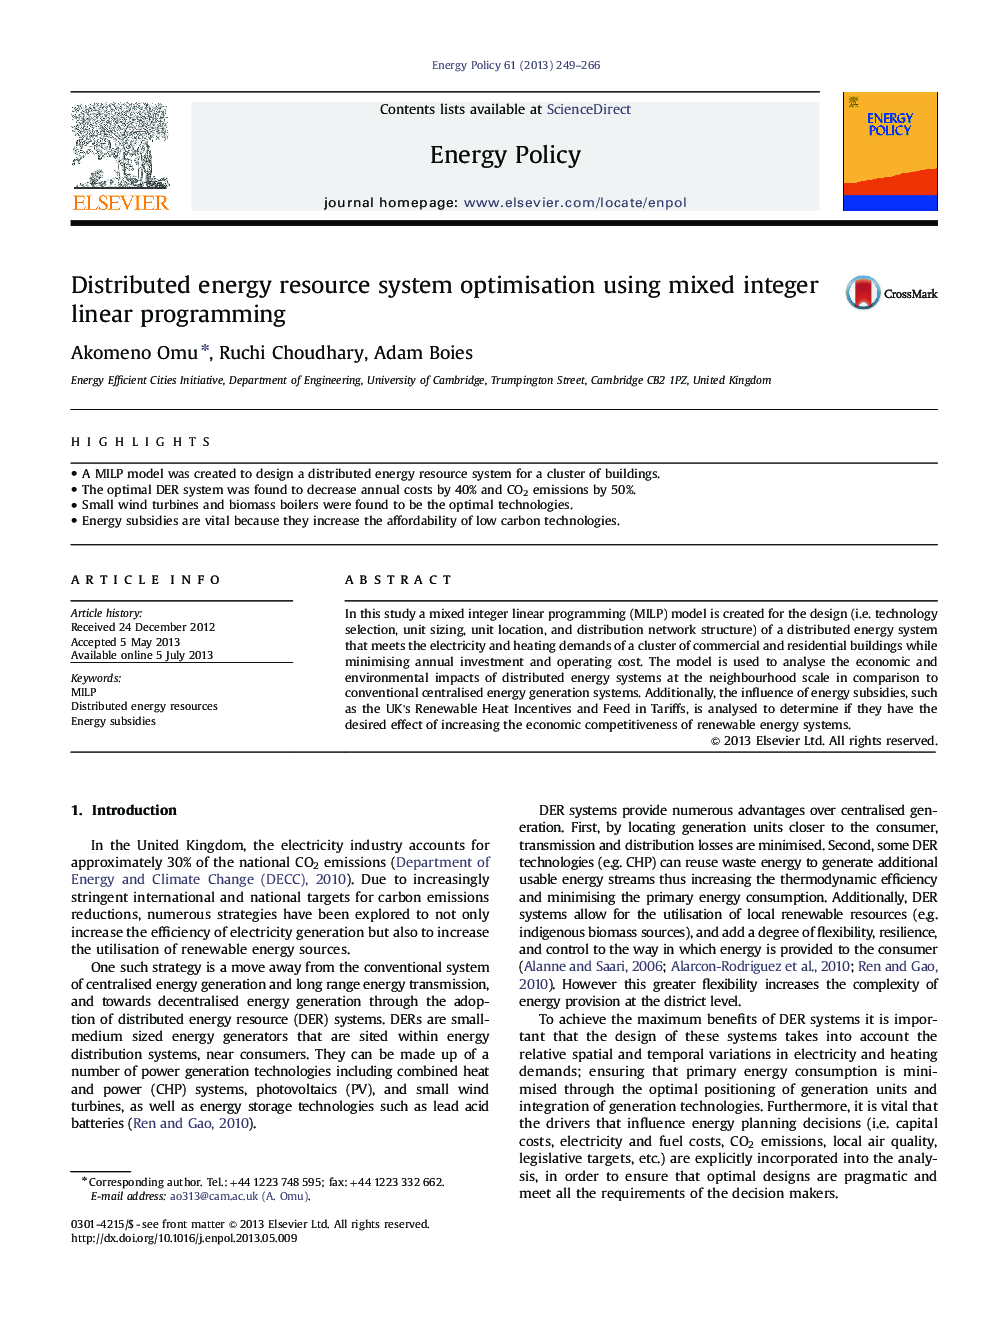 Distributed energy resource system optimisation using mixed integer linear programming